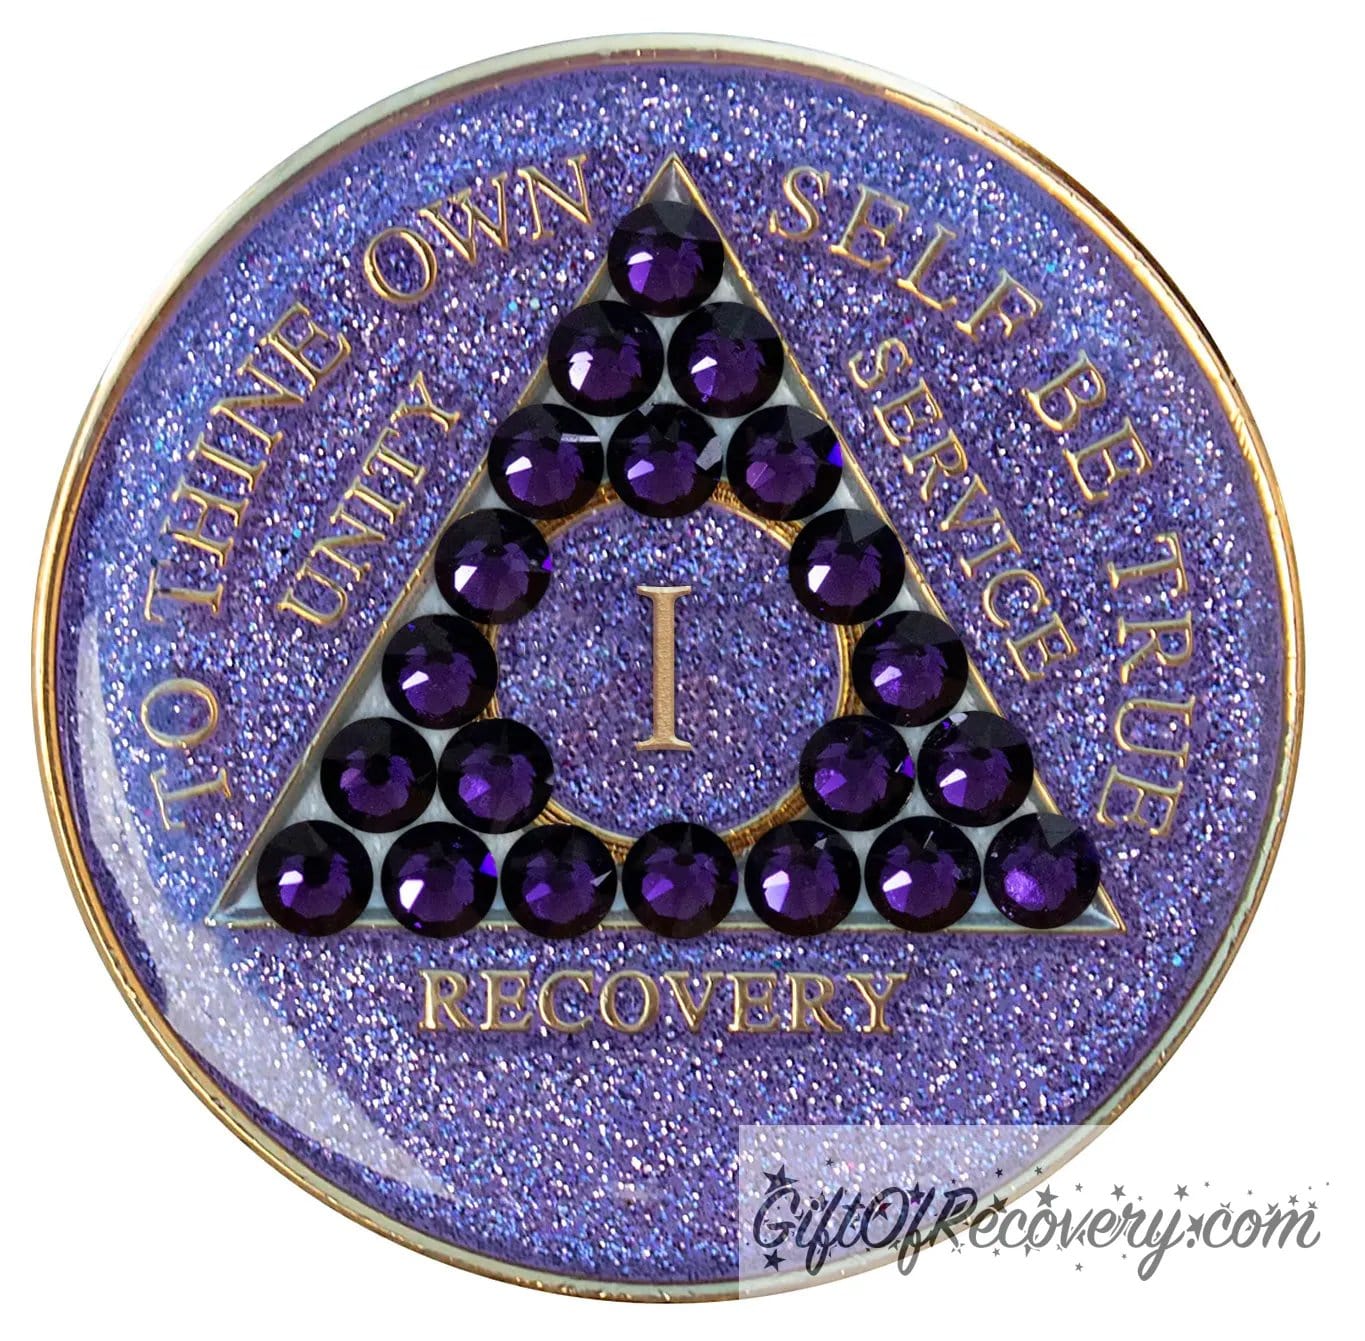 1 year glitter purple AA medallion with 21 purple velvet genuine crystals, that create the triangle in middle, and to thine own self be true, unity, service, recovery, the roman numeral in the center of the circle triangle, along with the rim of the recovery medallion, are embossed in 14 gold plated brass.